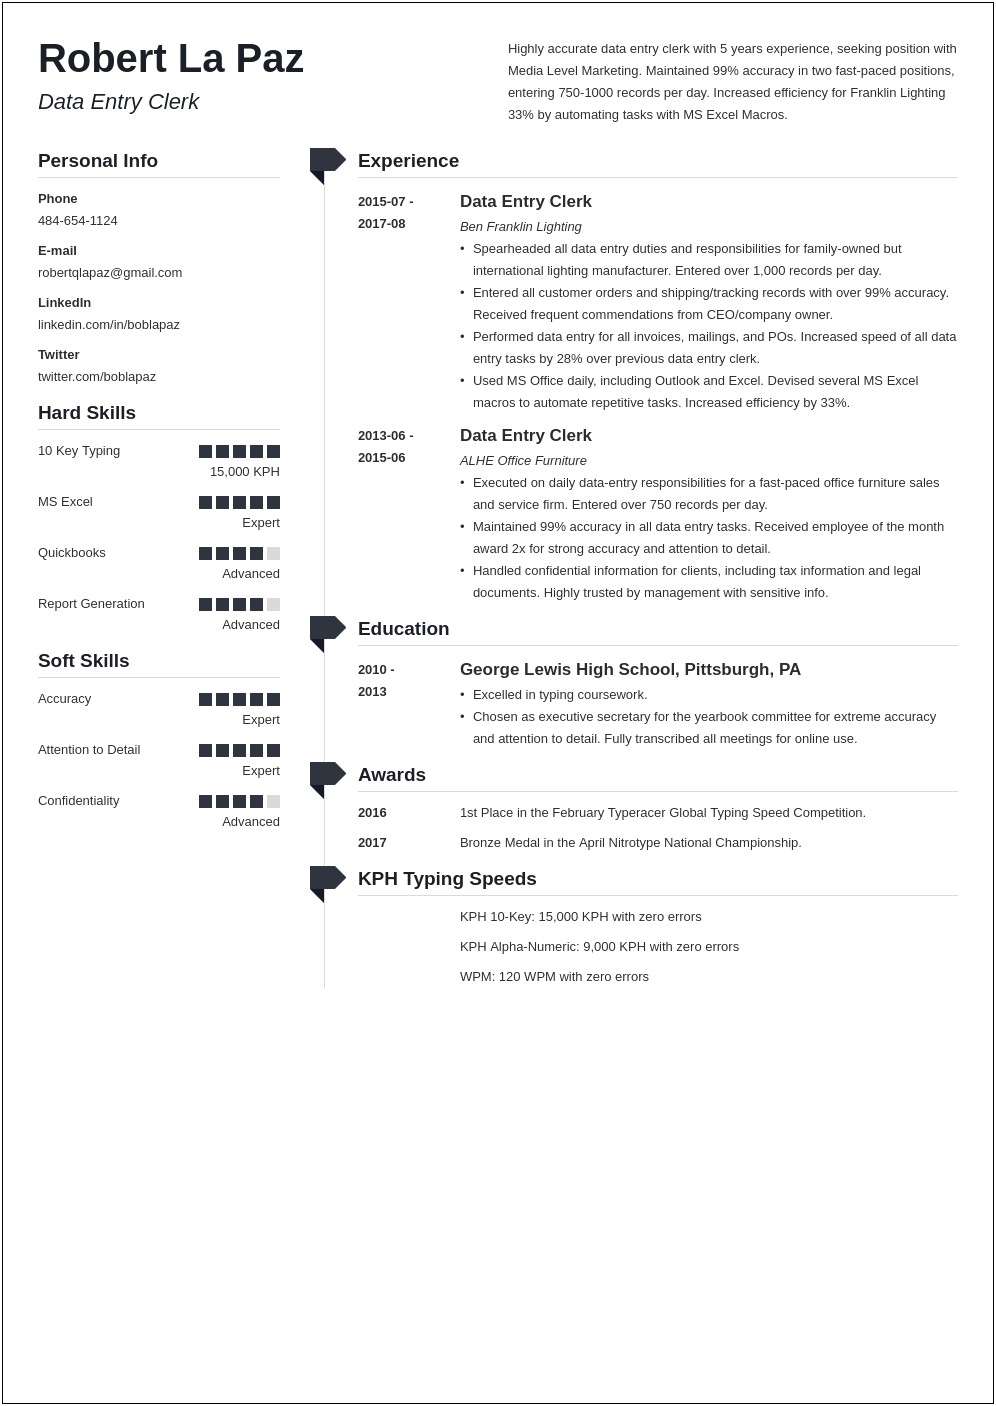 Entry Level Clinical Data Specialist Resume Summary Samples